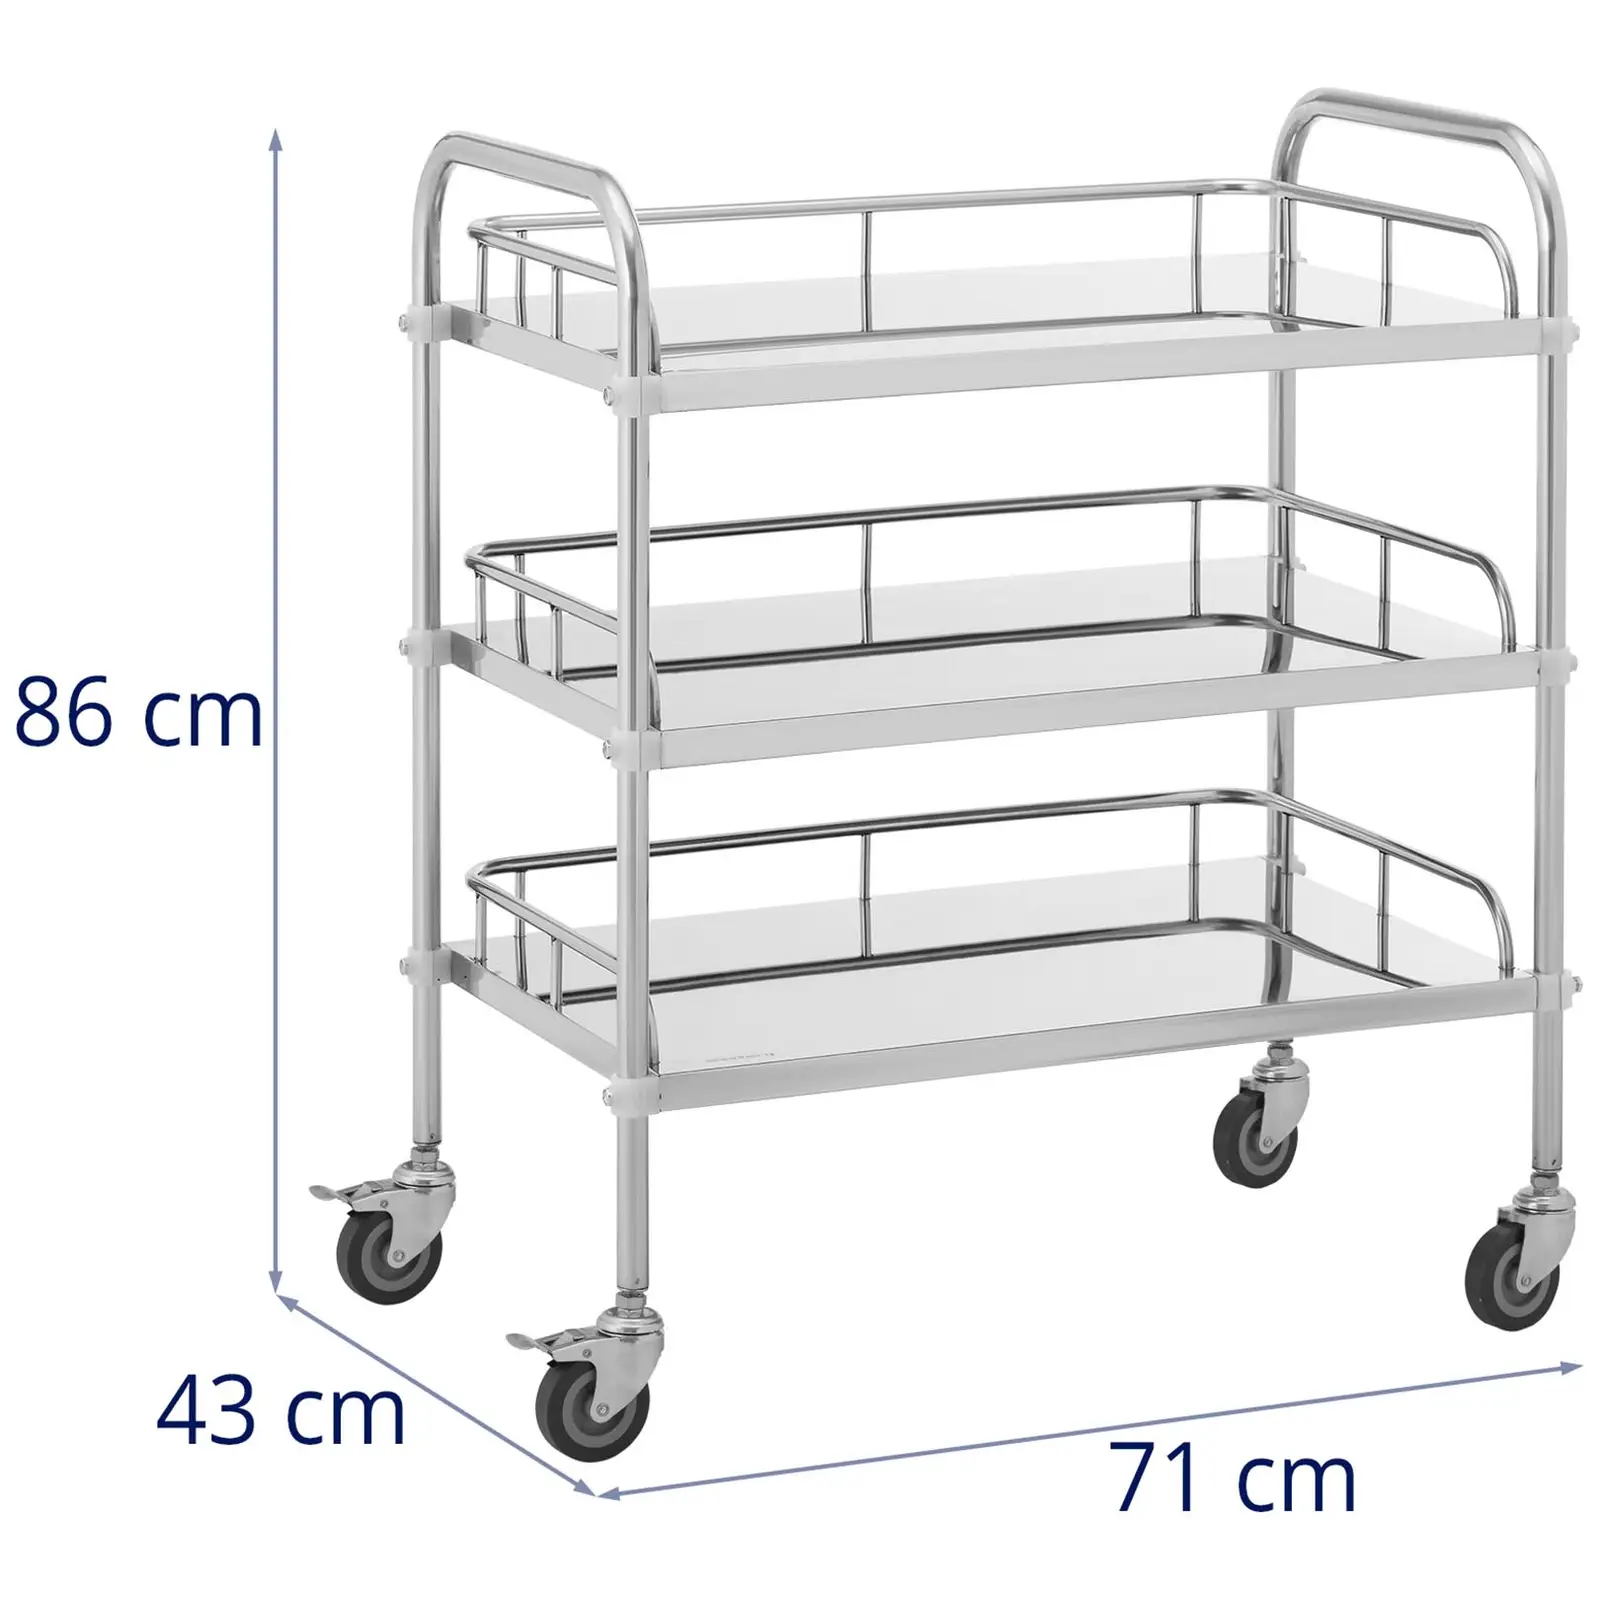 Laboratory Trolley - stainless steel - 3 shelves each 60 x 40 x 2.5 cm - 30 kg